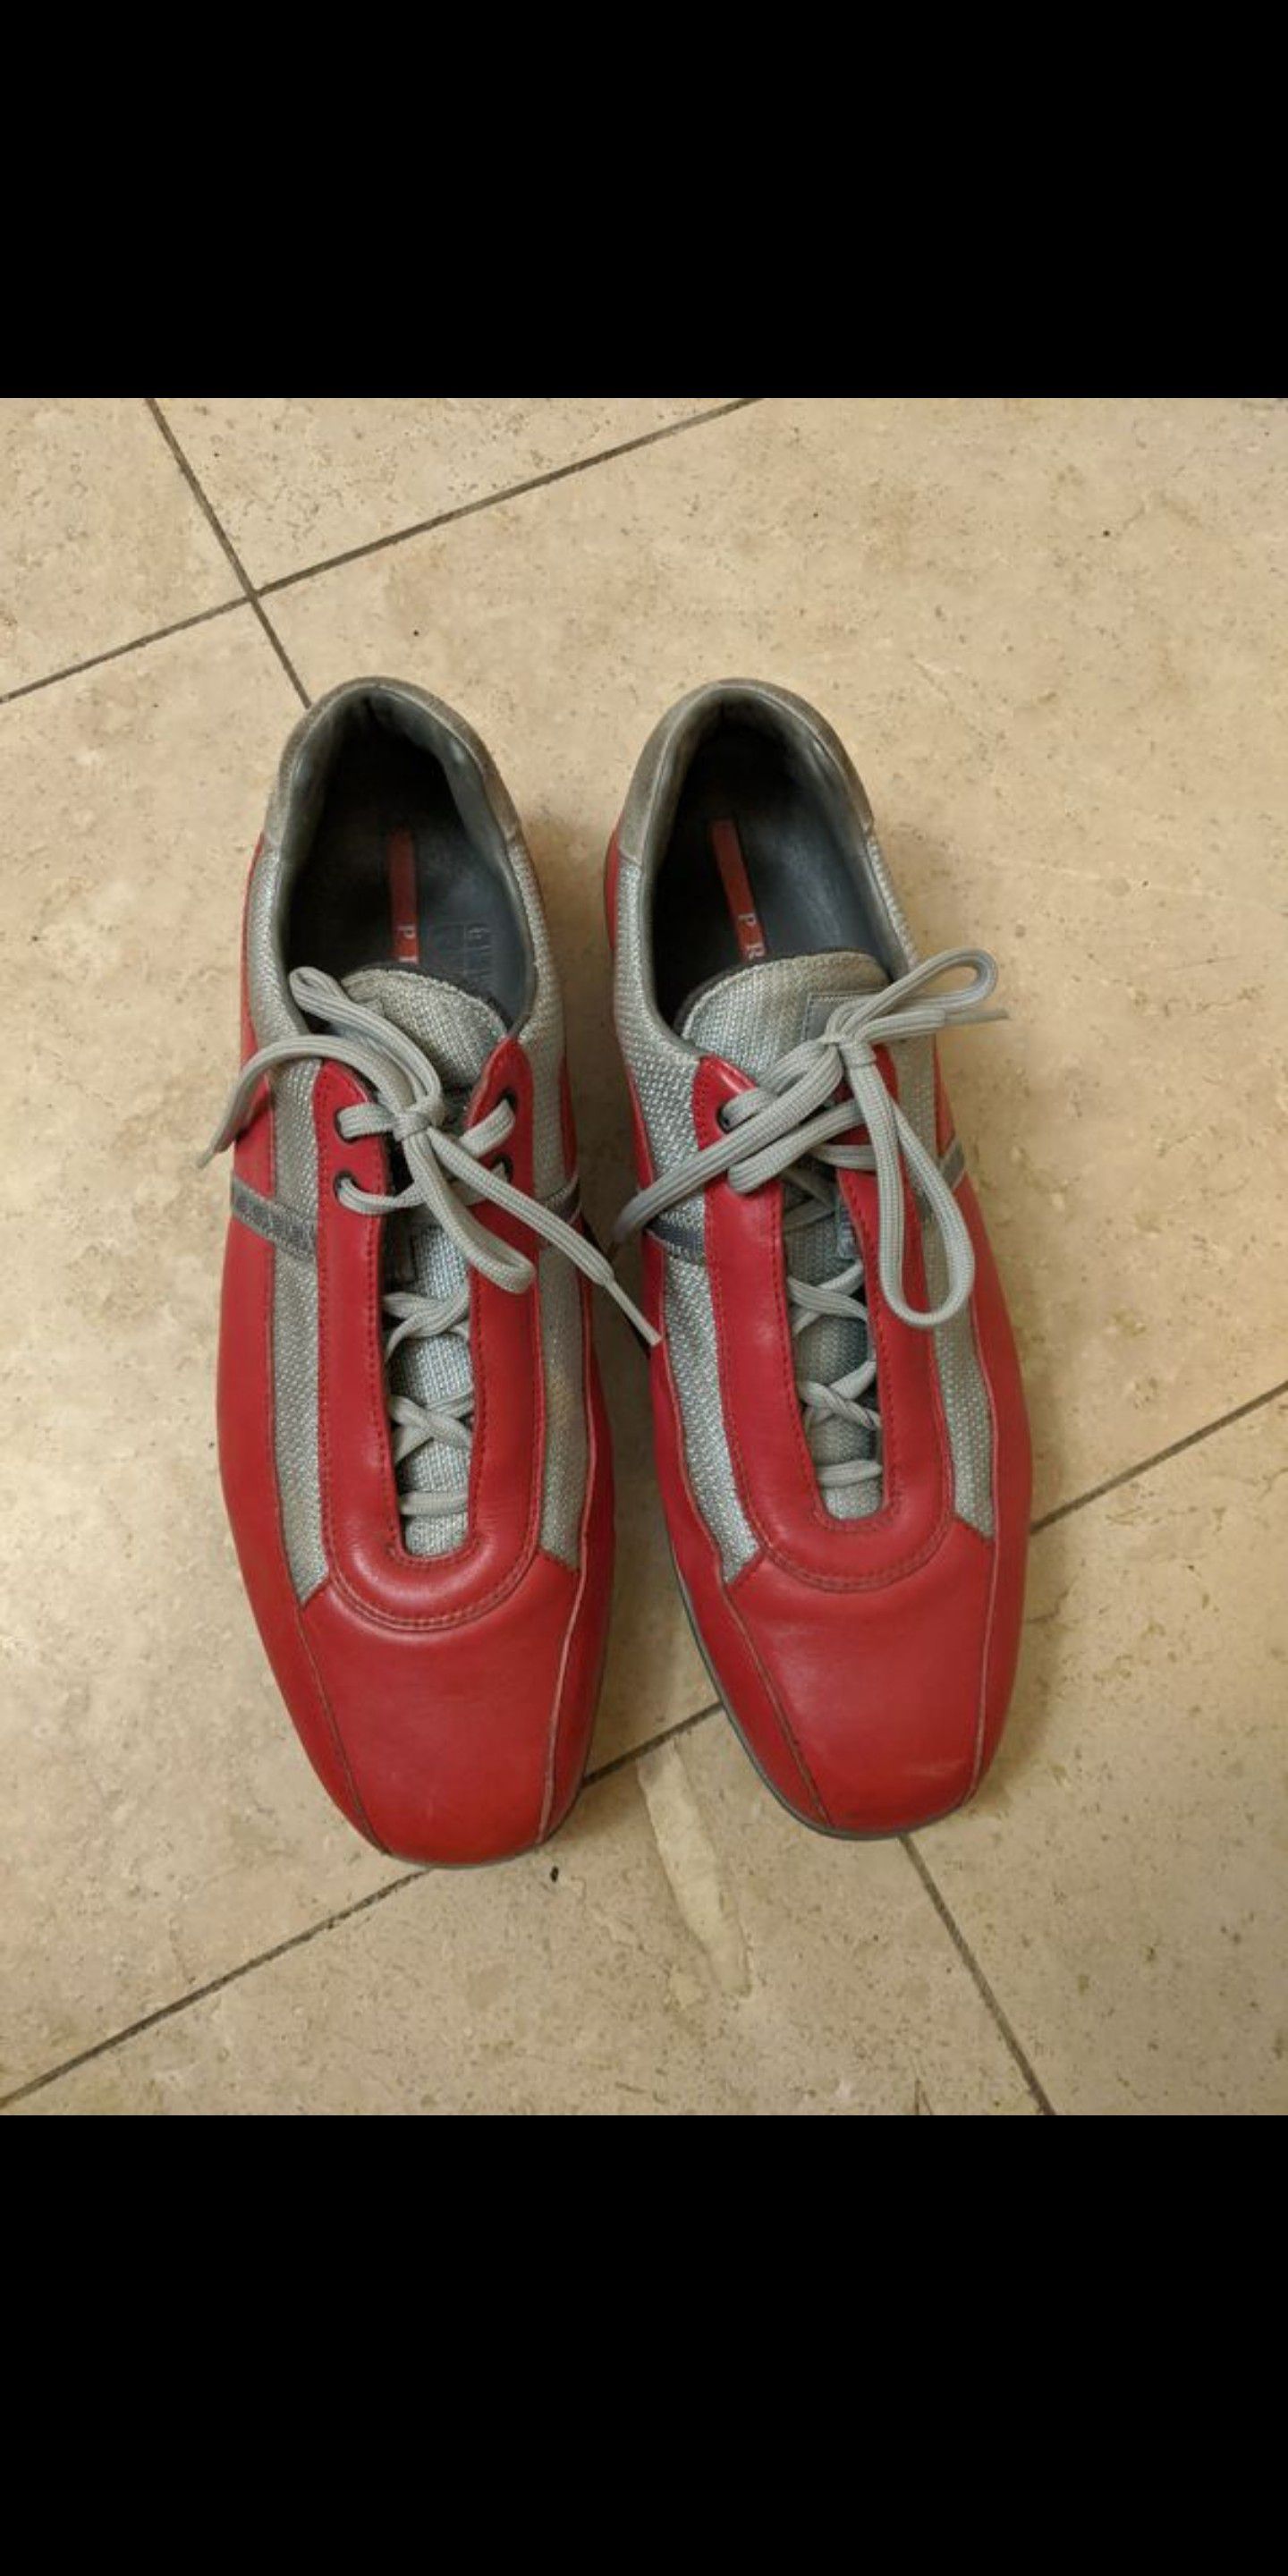 Prada sport red shoes (size 11)